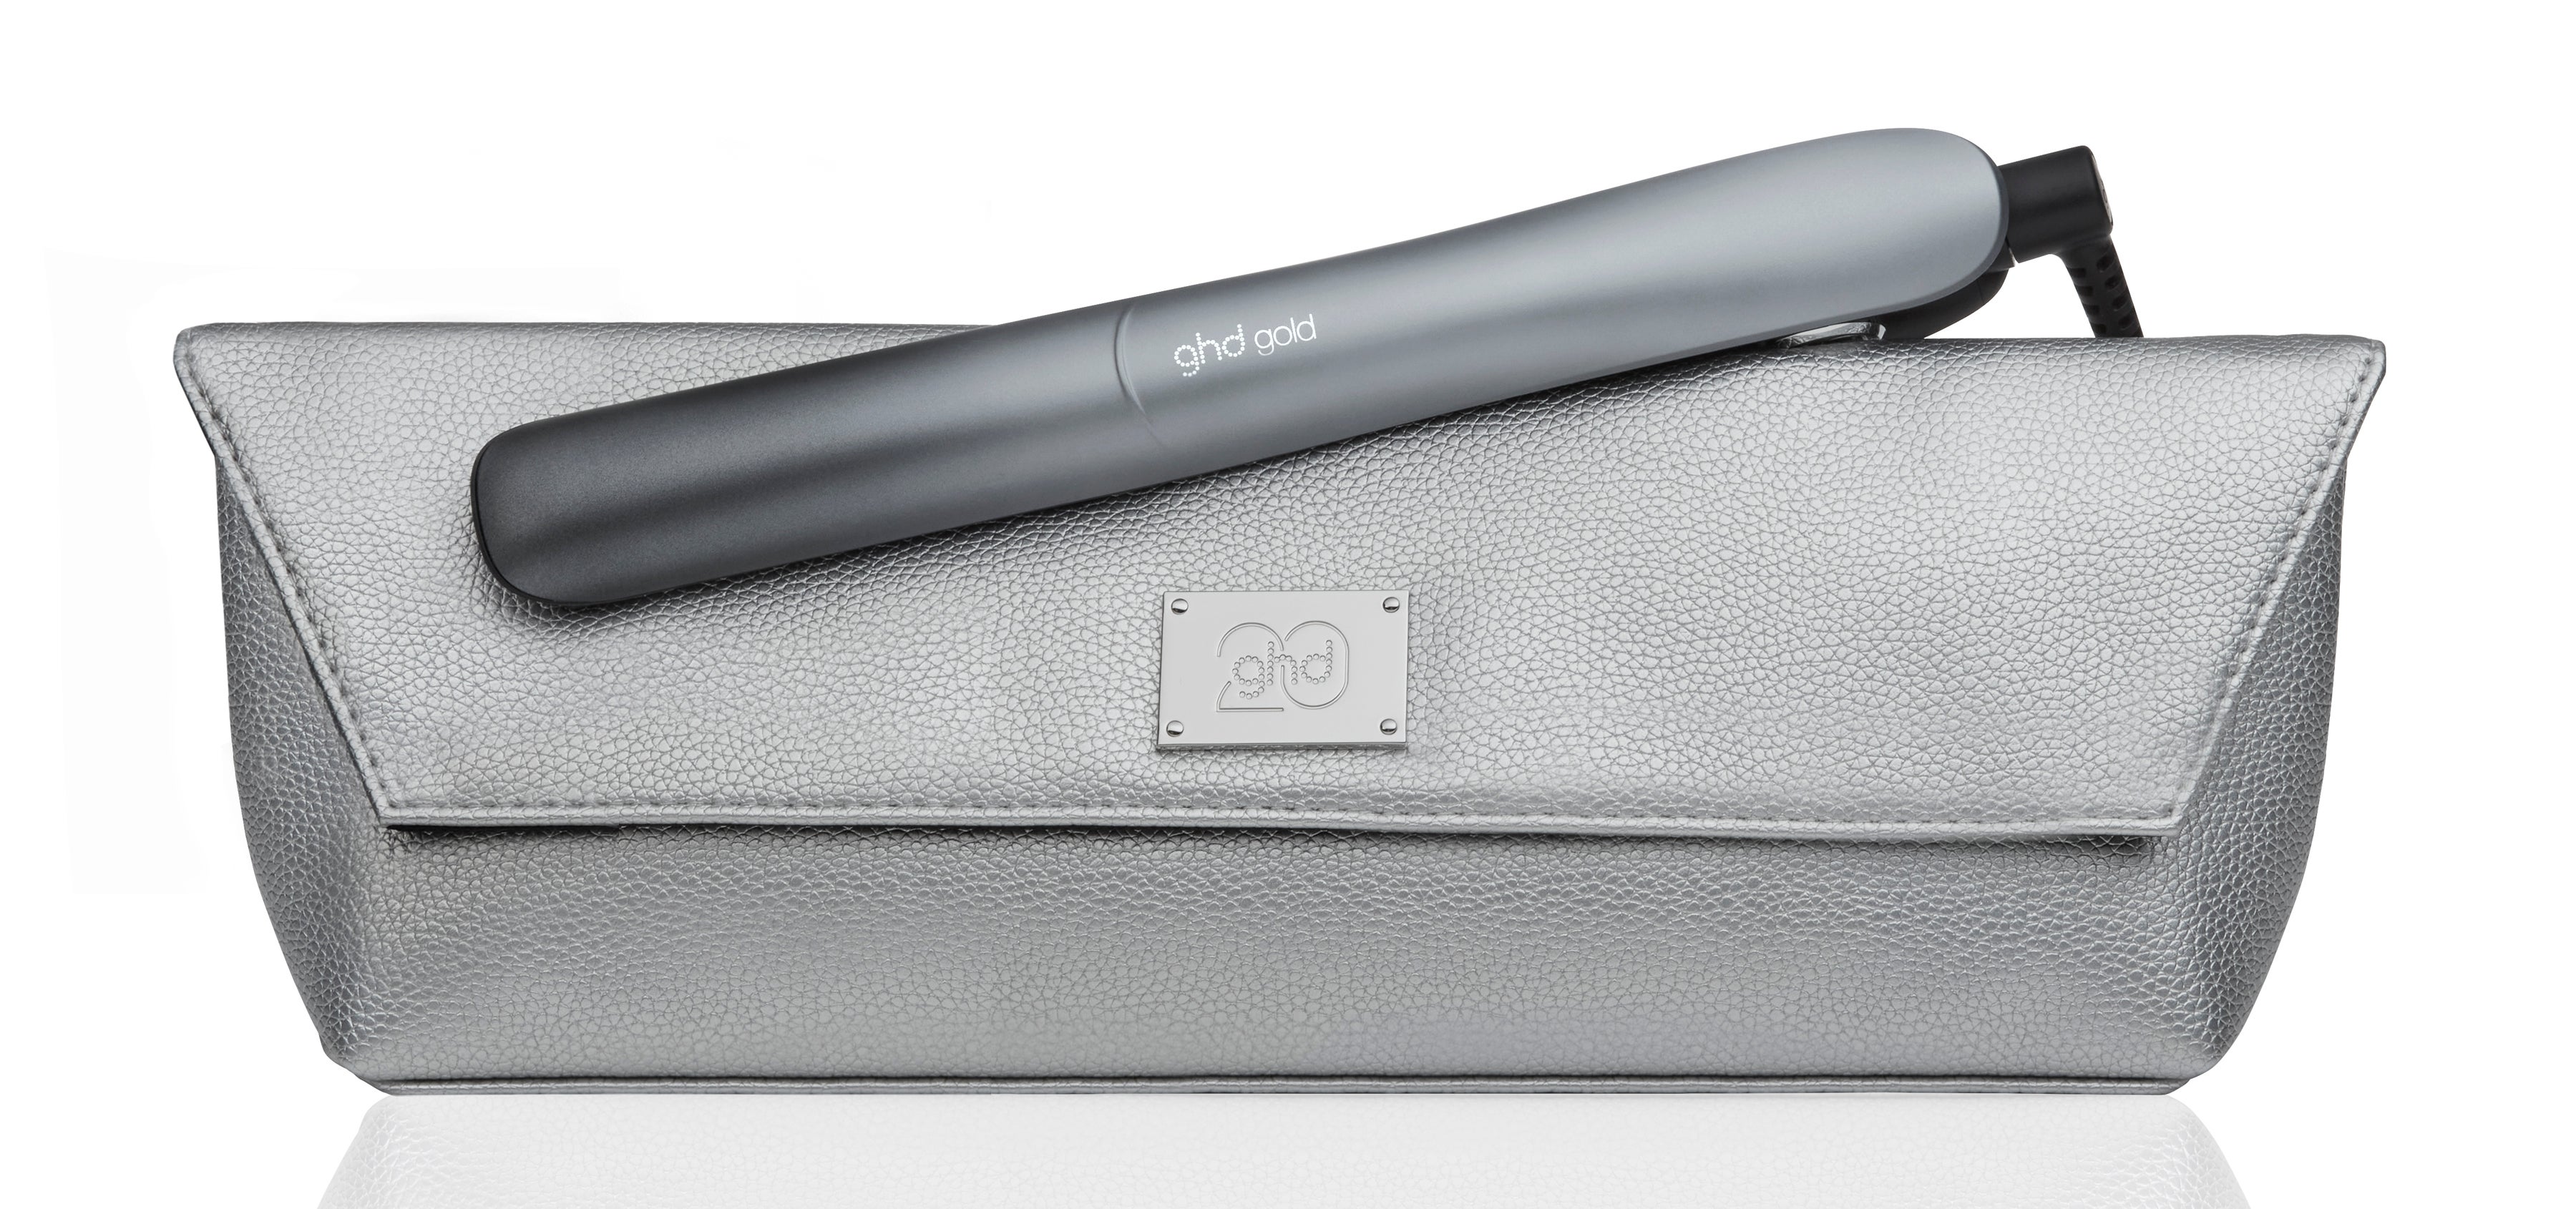 GHD Gold Hair Straightener in Ombre Chrome